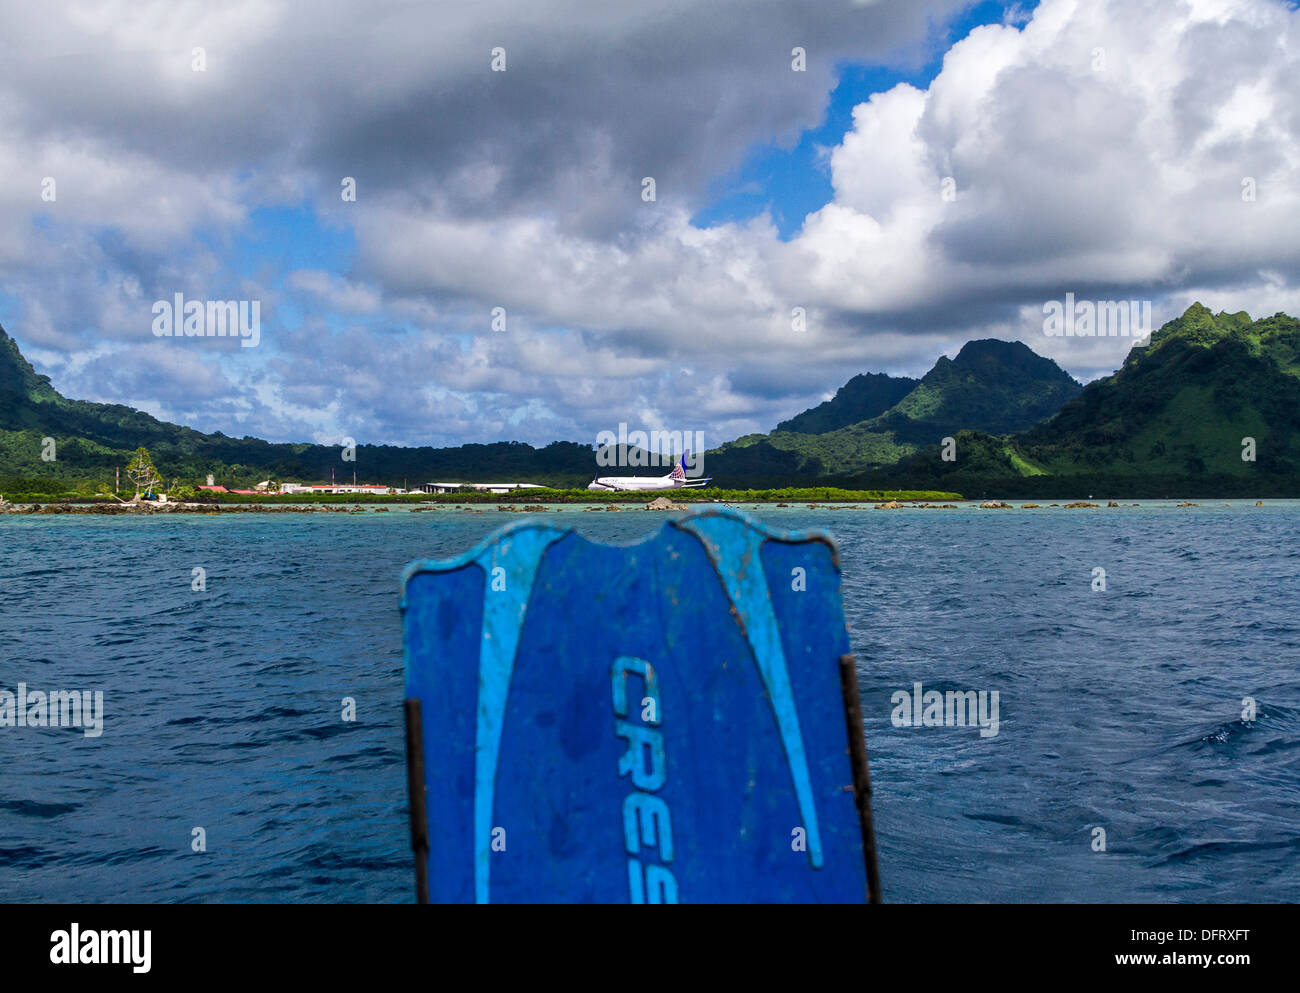 View from dive boat with diver who just arrived on that jet, getting ready for first dive on Kosrae Stock Photo